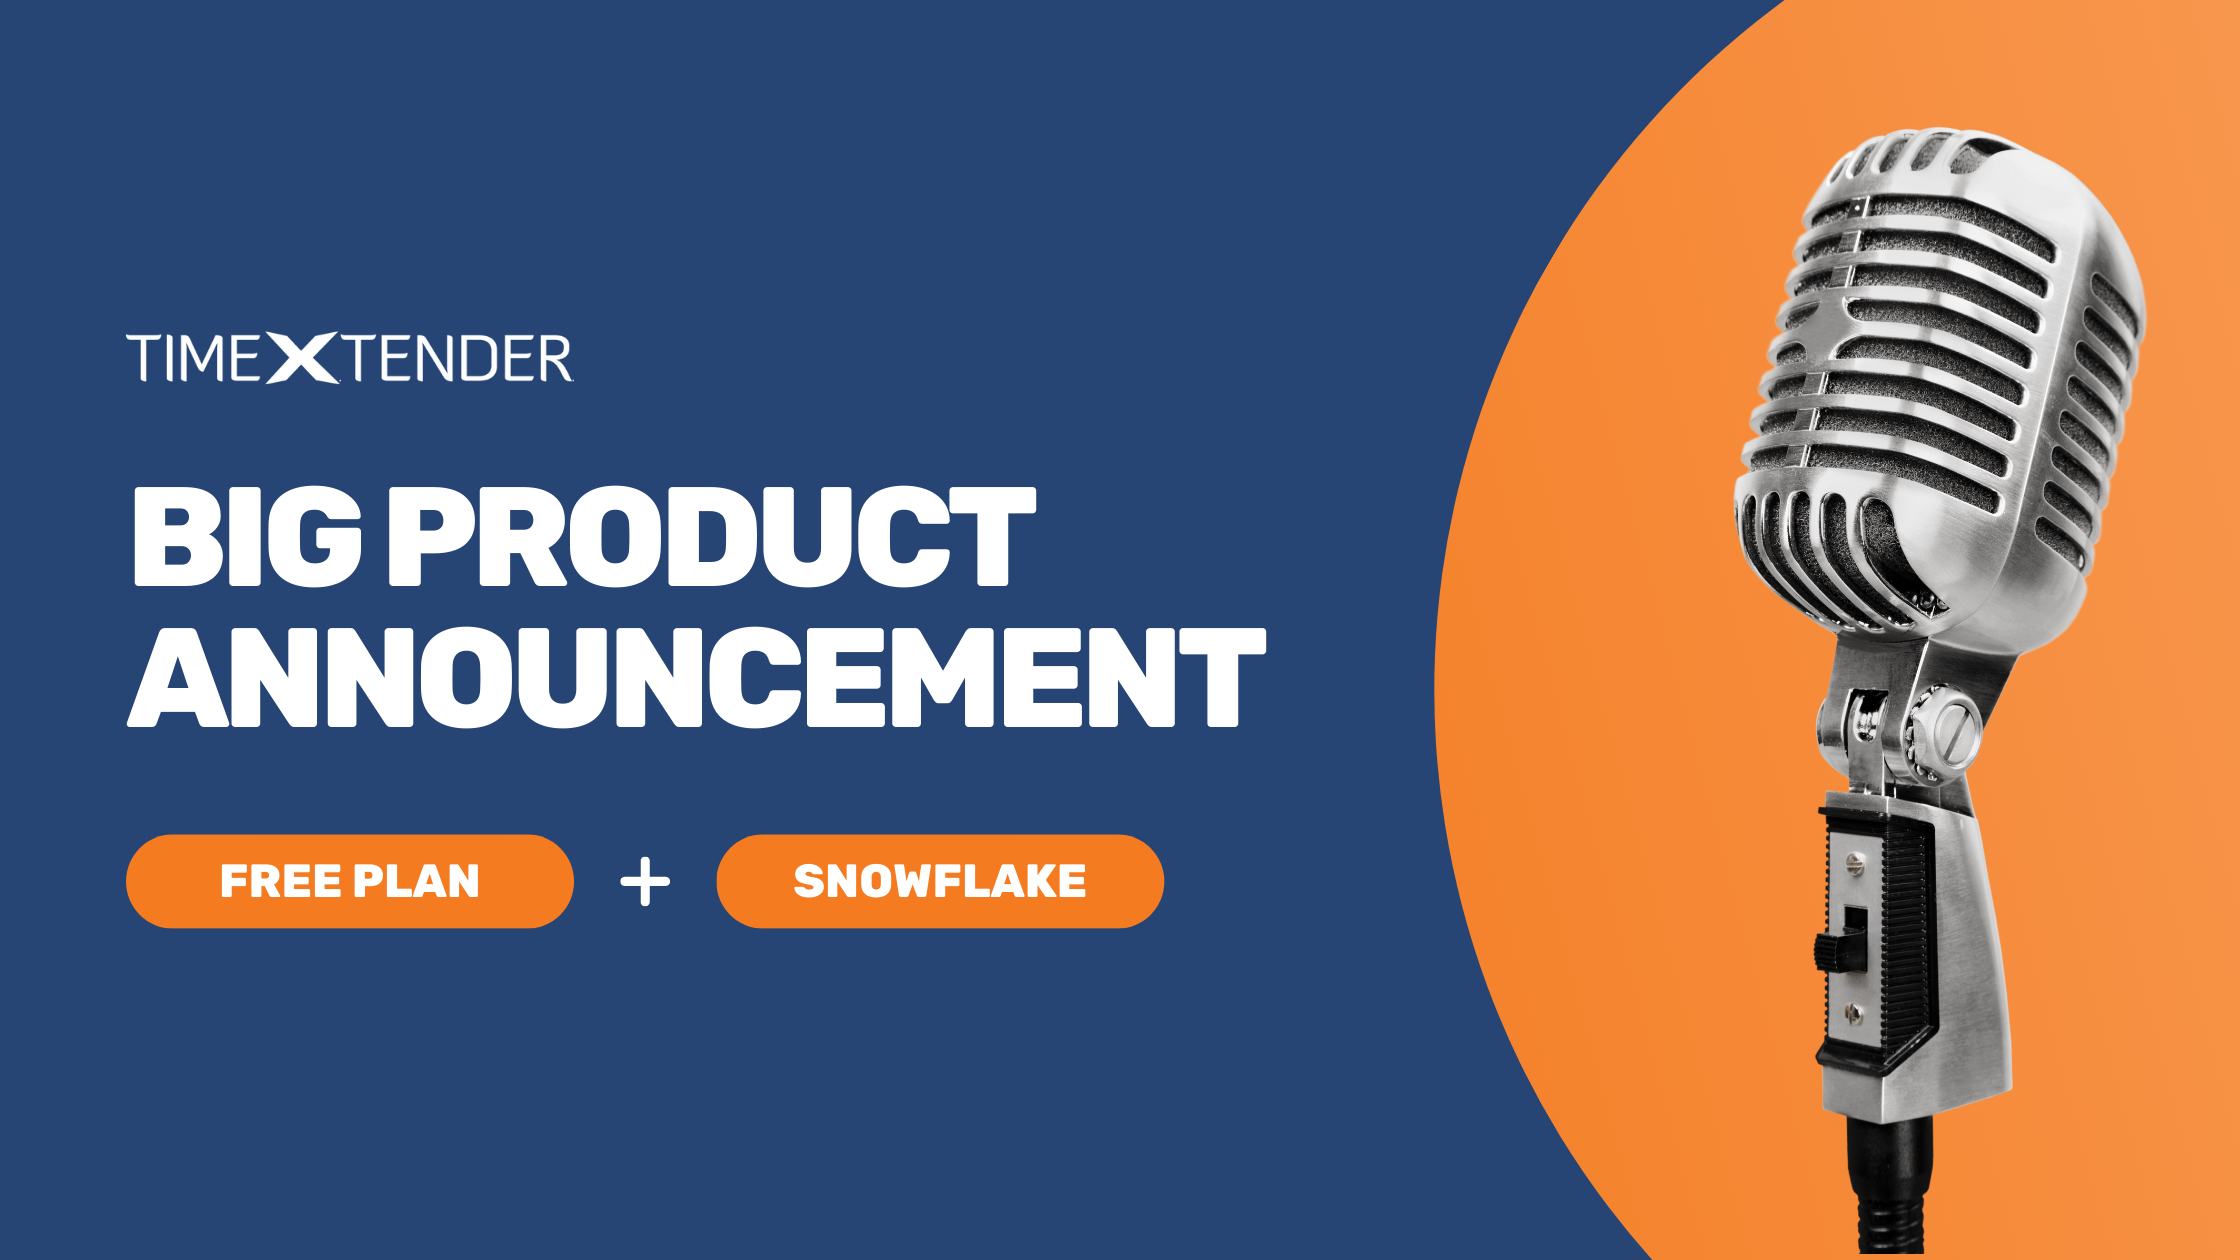 TimeXtender Product Announcement Snowflake Free Plan